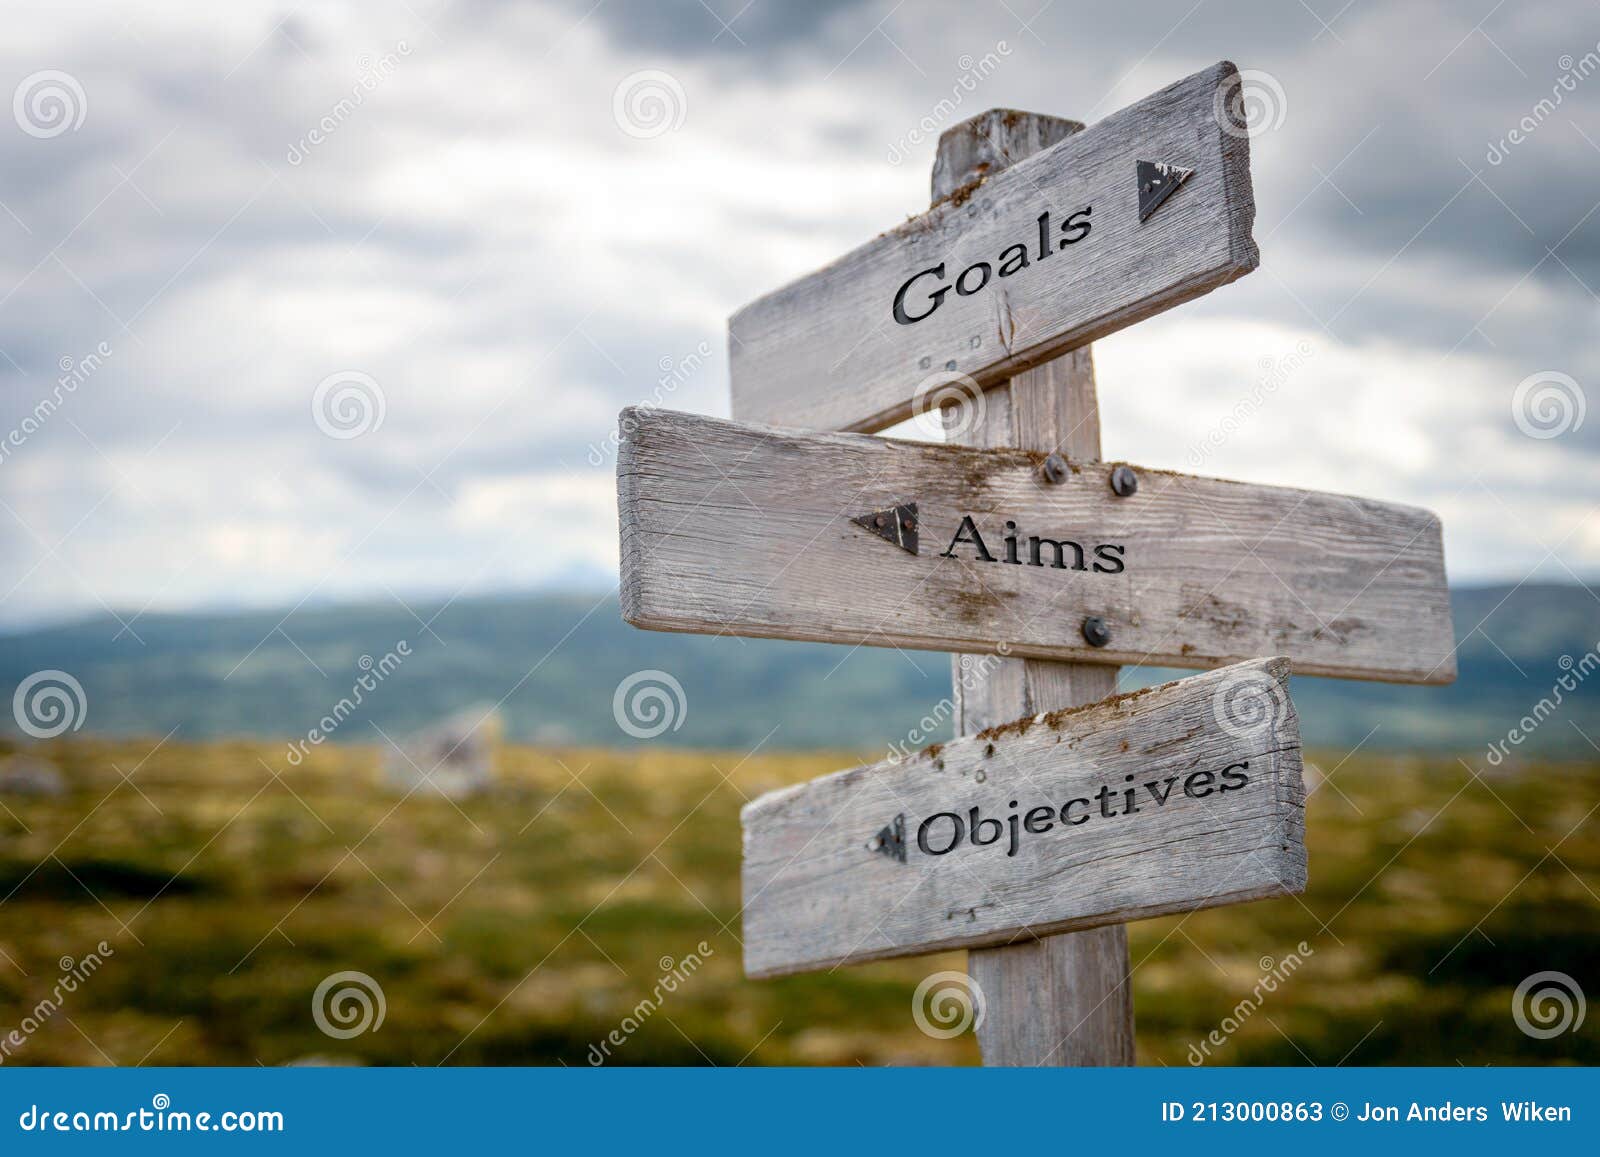 goals aims objectives signpost outdoors